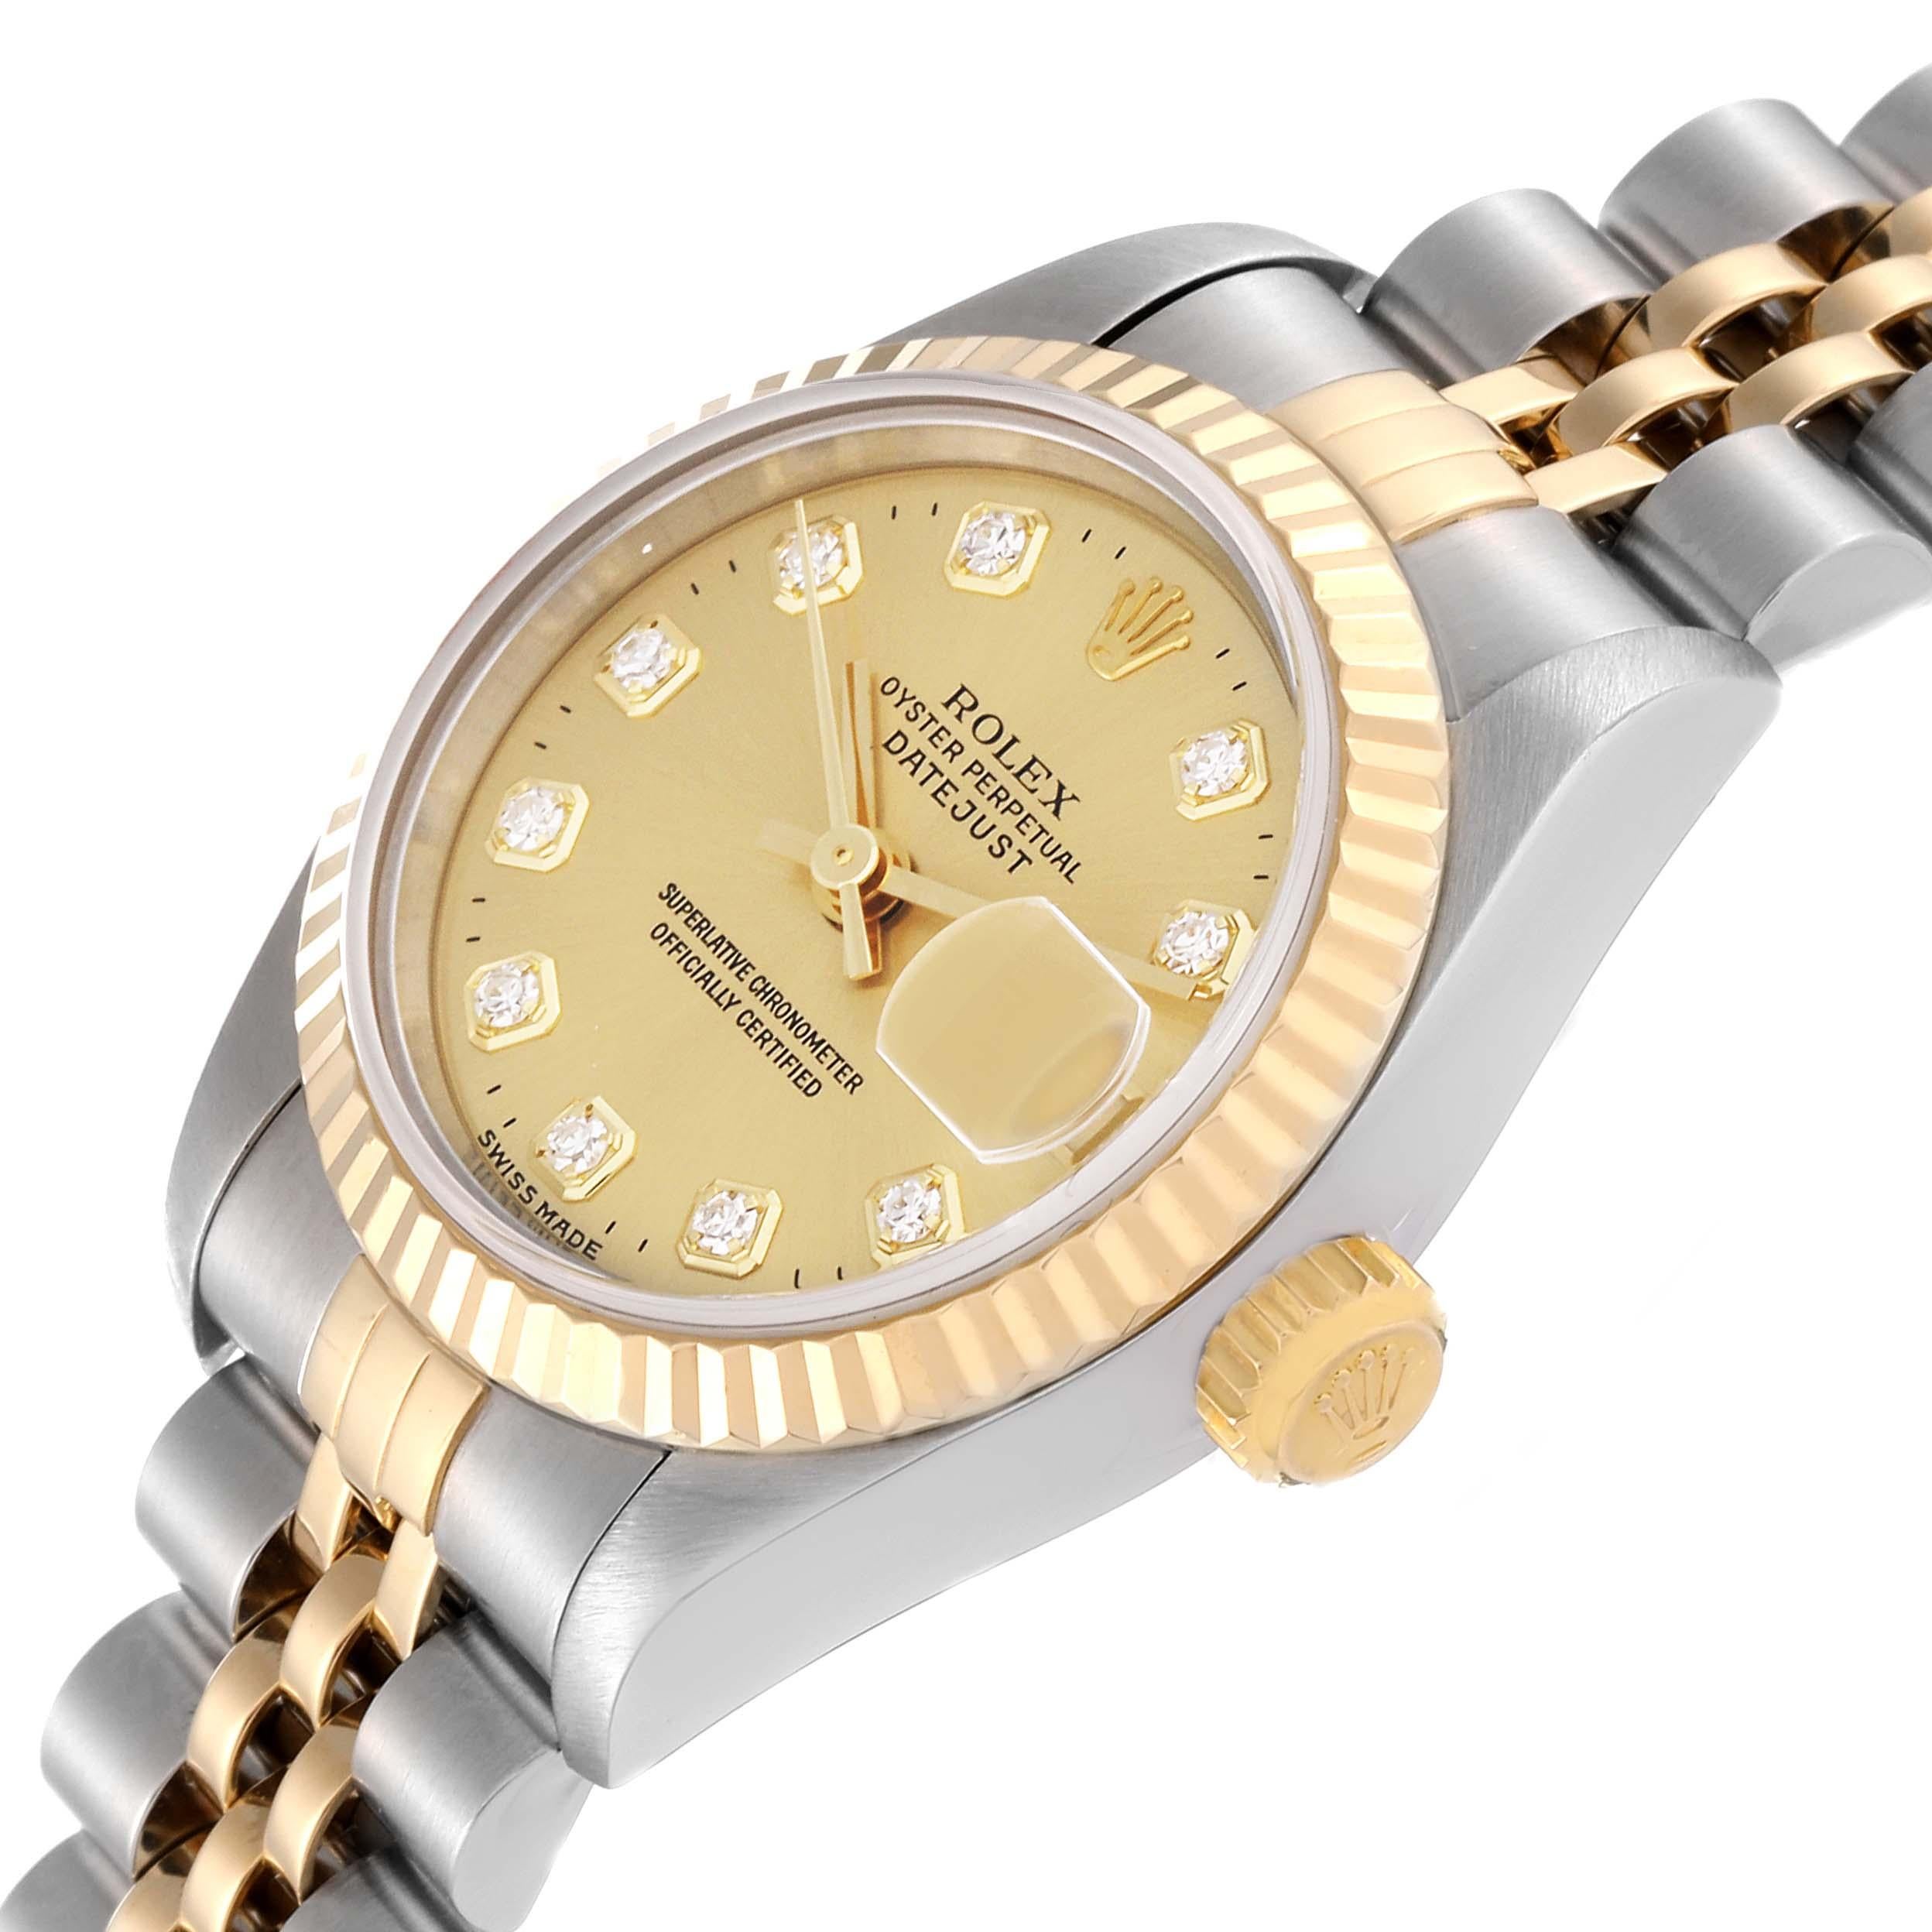 Rolex Datejust Diamond Dial Steel Yellow Gold Ladies Watch 69173 For Sale 3